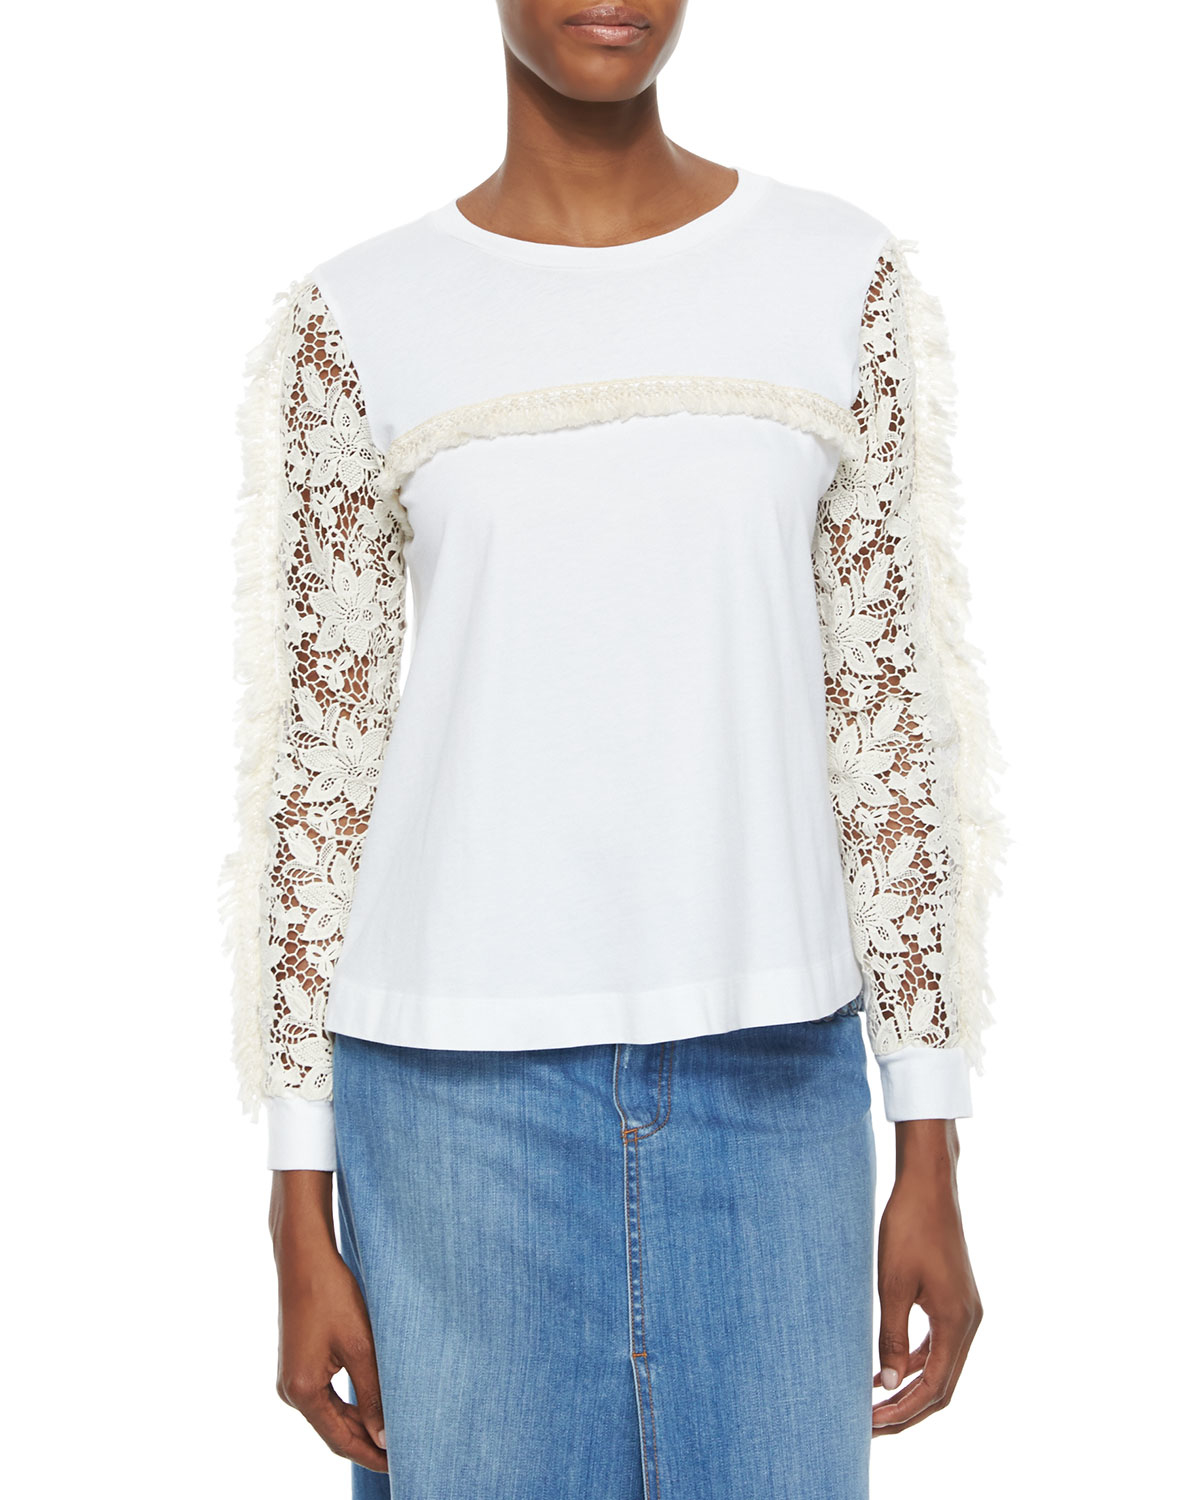 Lyst - See By Chloé Long-lace-sleeve Top in White